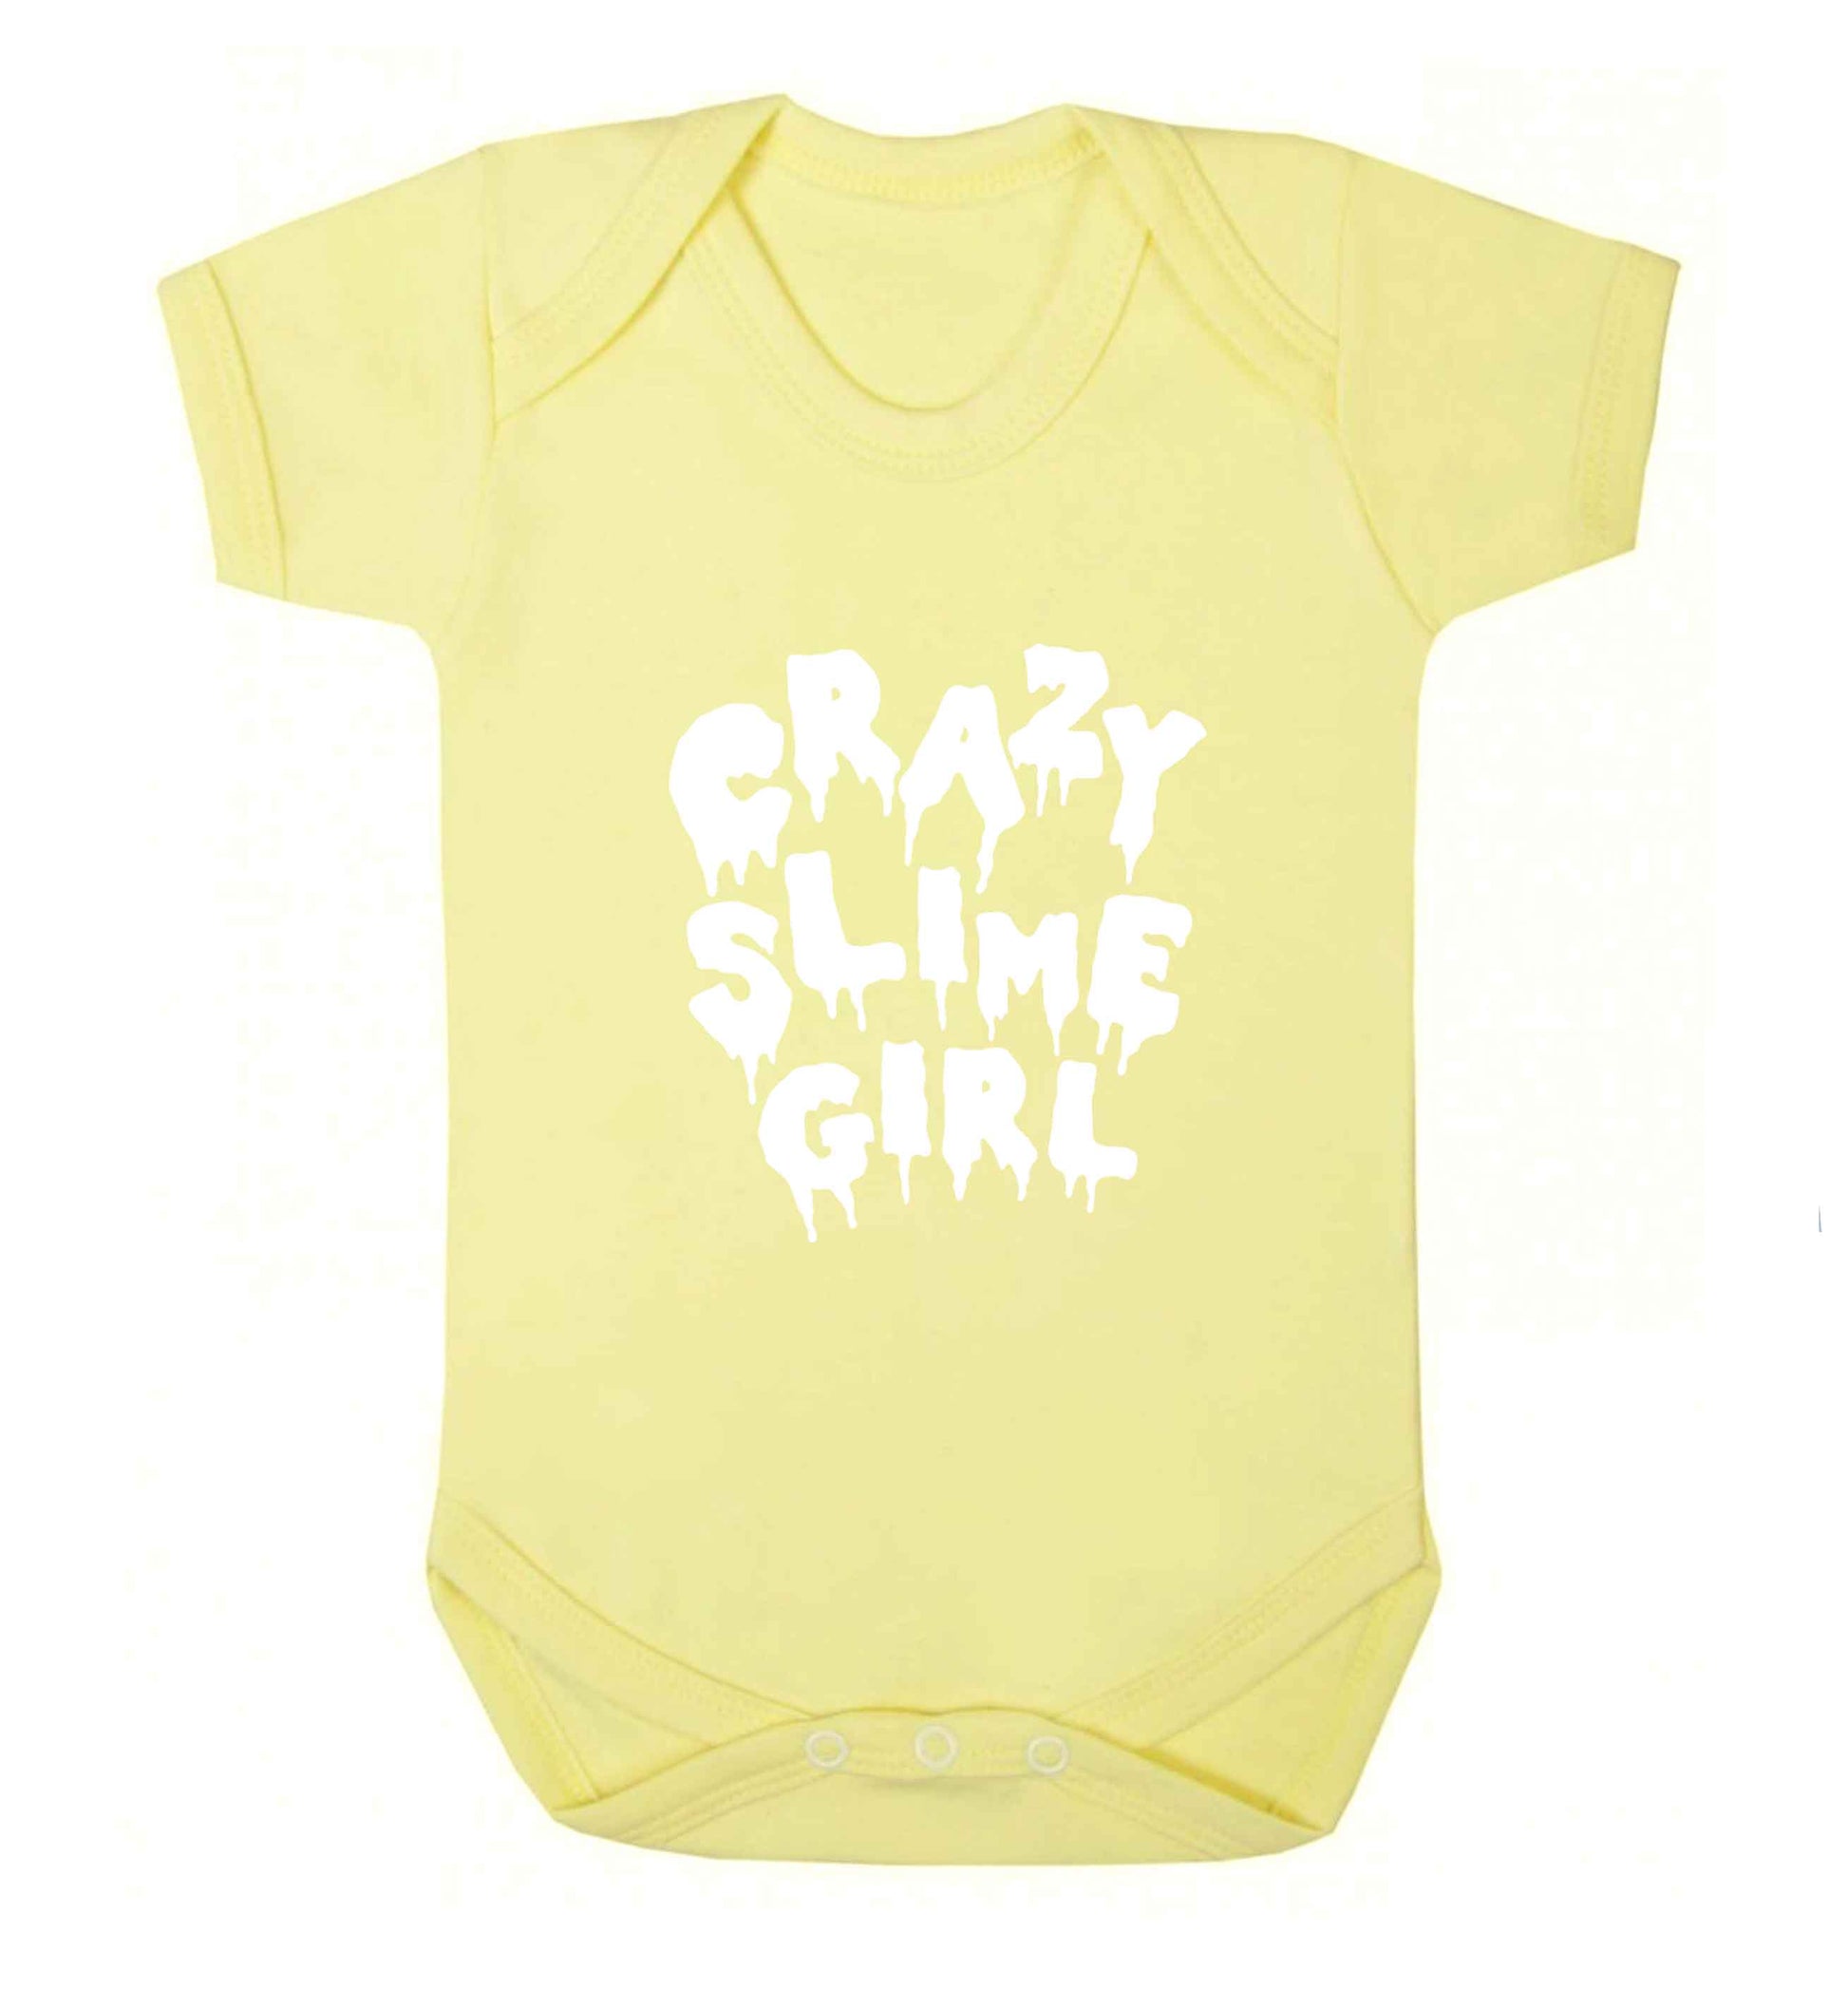 Crazy slime girl baby vest pale yellow 18-24 months